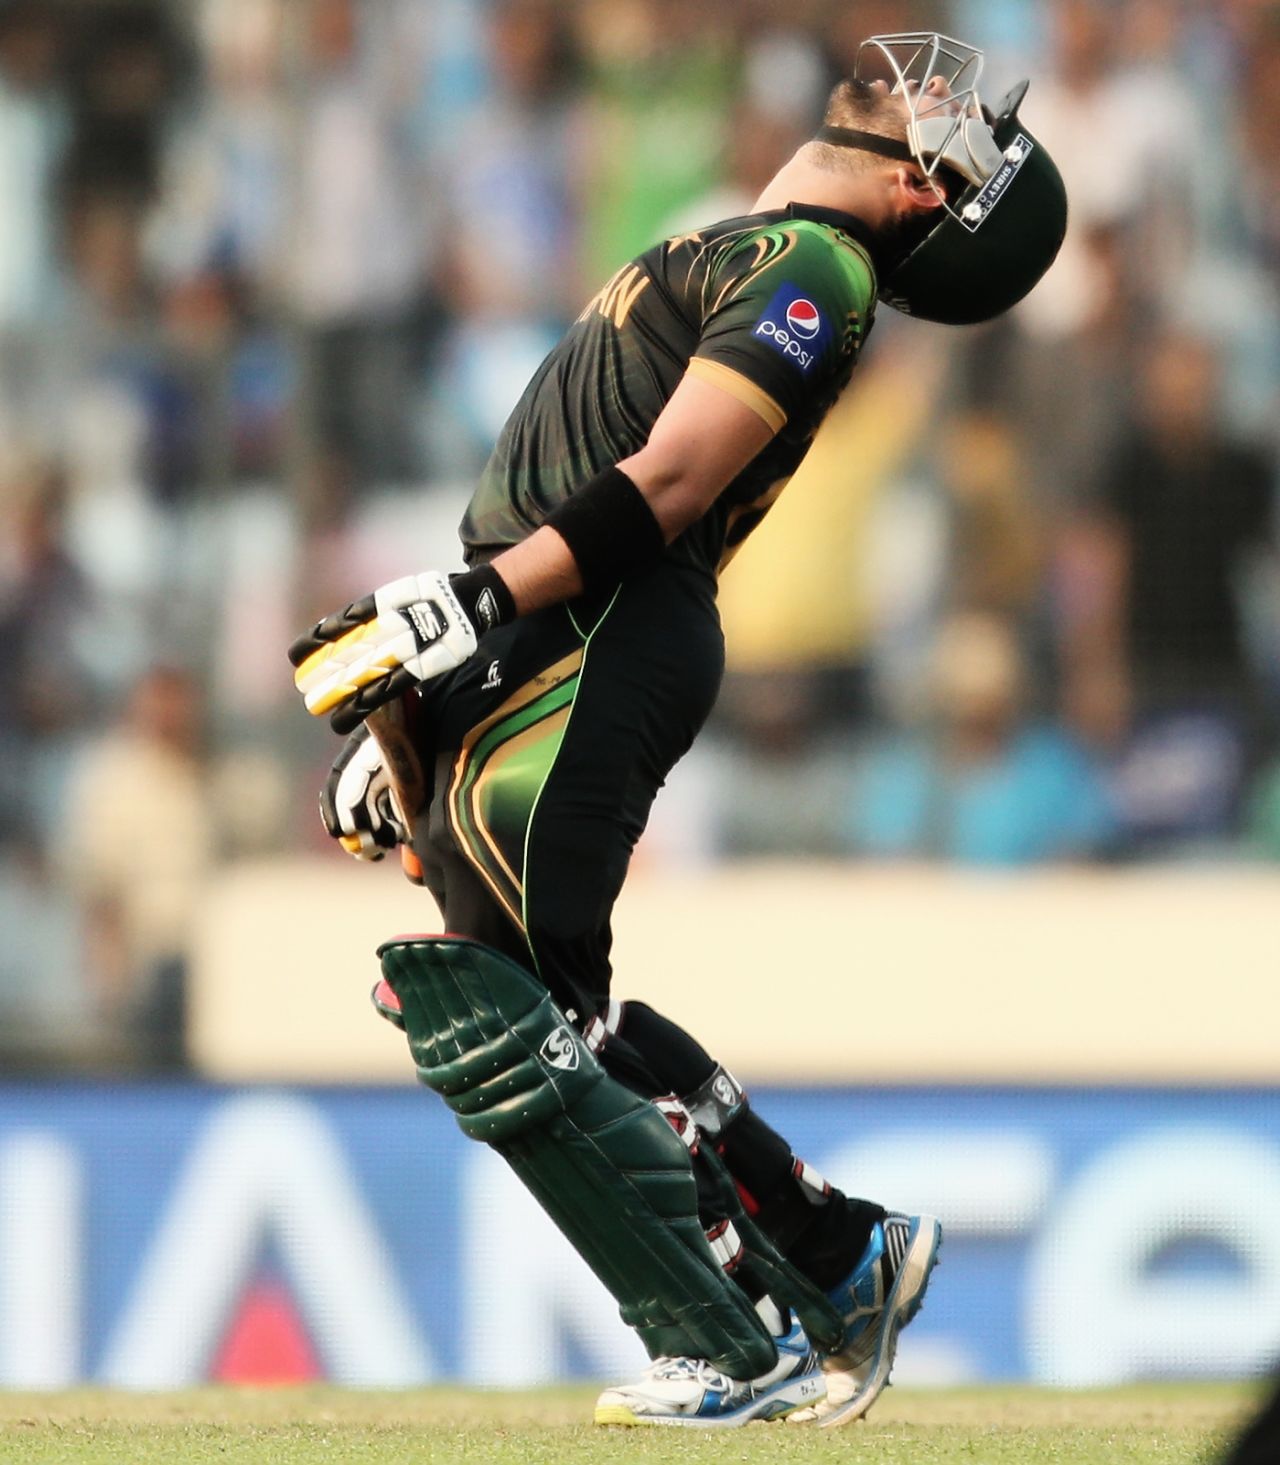 Umar Akmal reacts after being dismissed for 94, Australia v Pakistan, World T20, Group 2, Mirpur, March 23, 2014